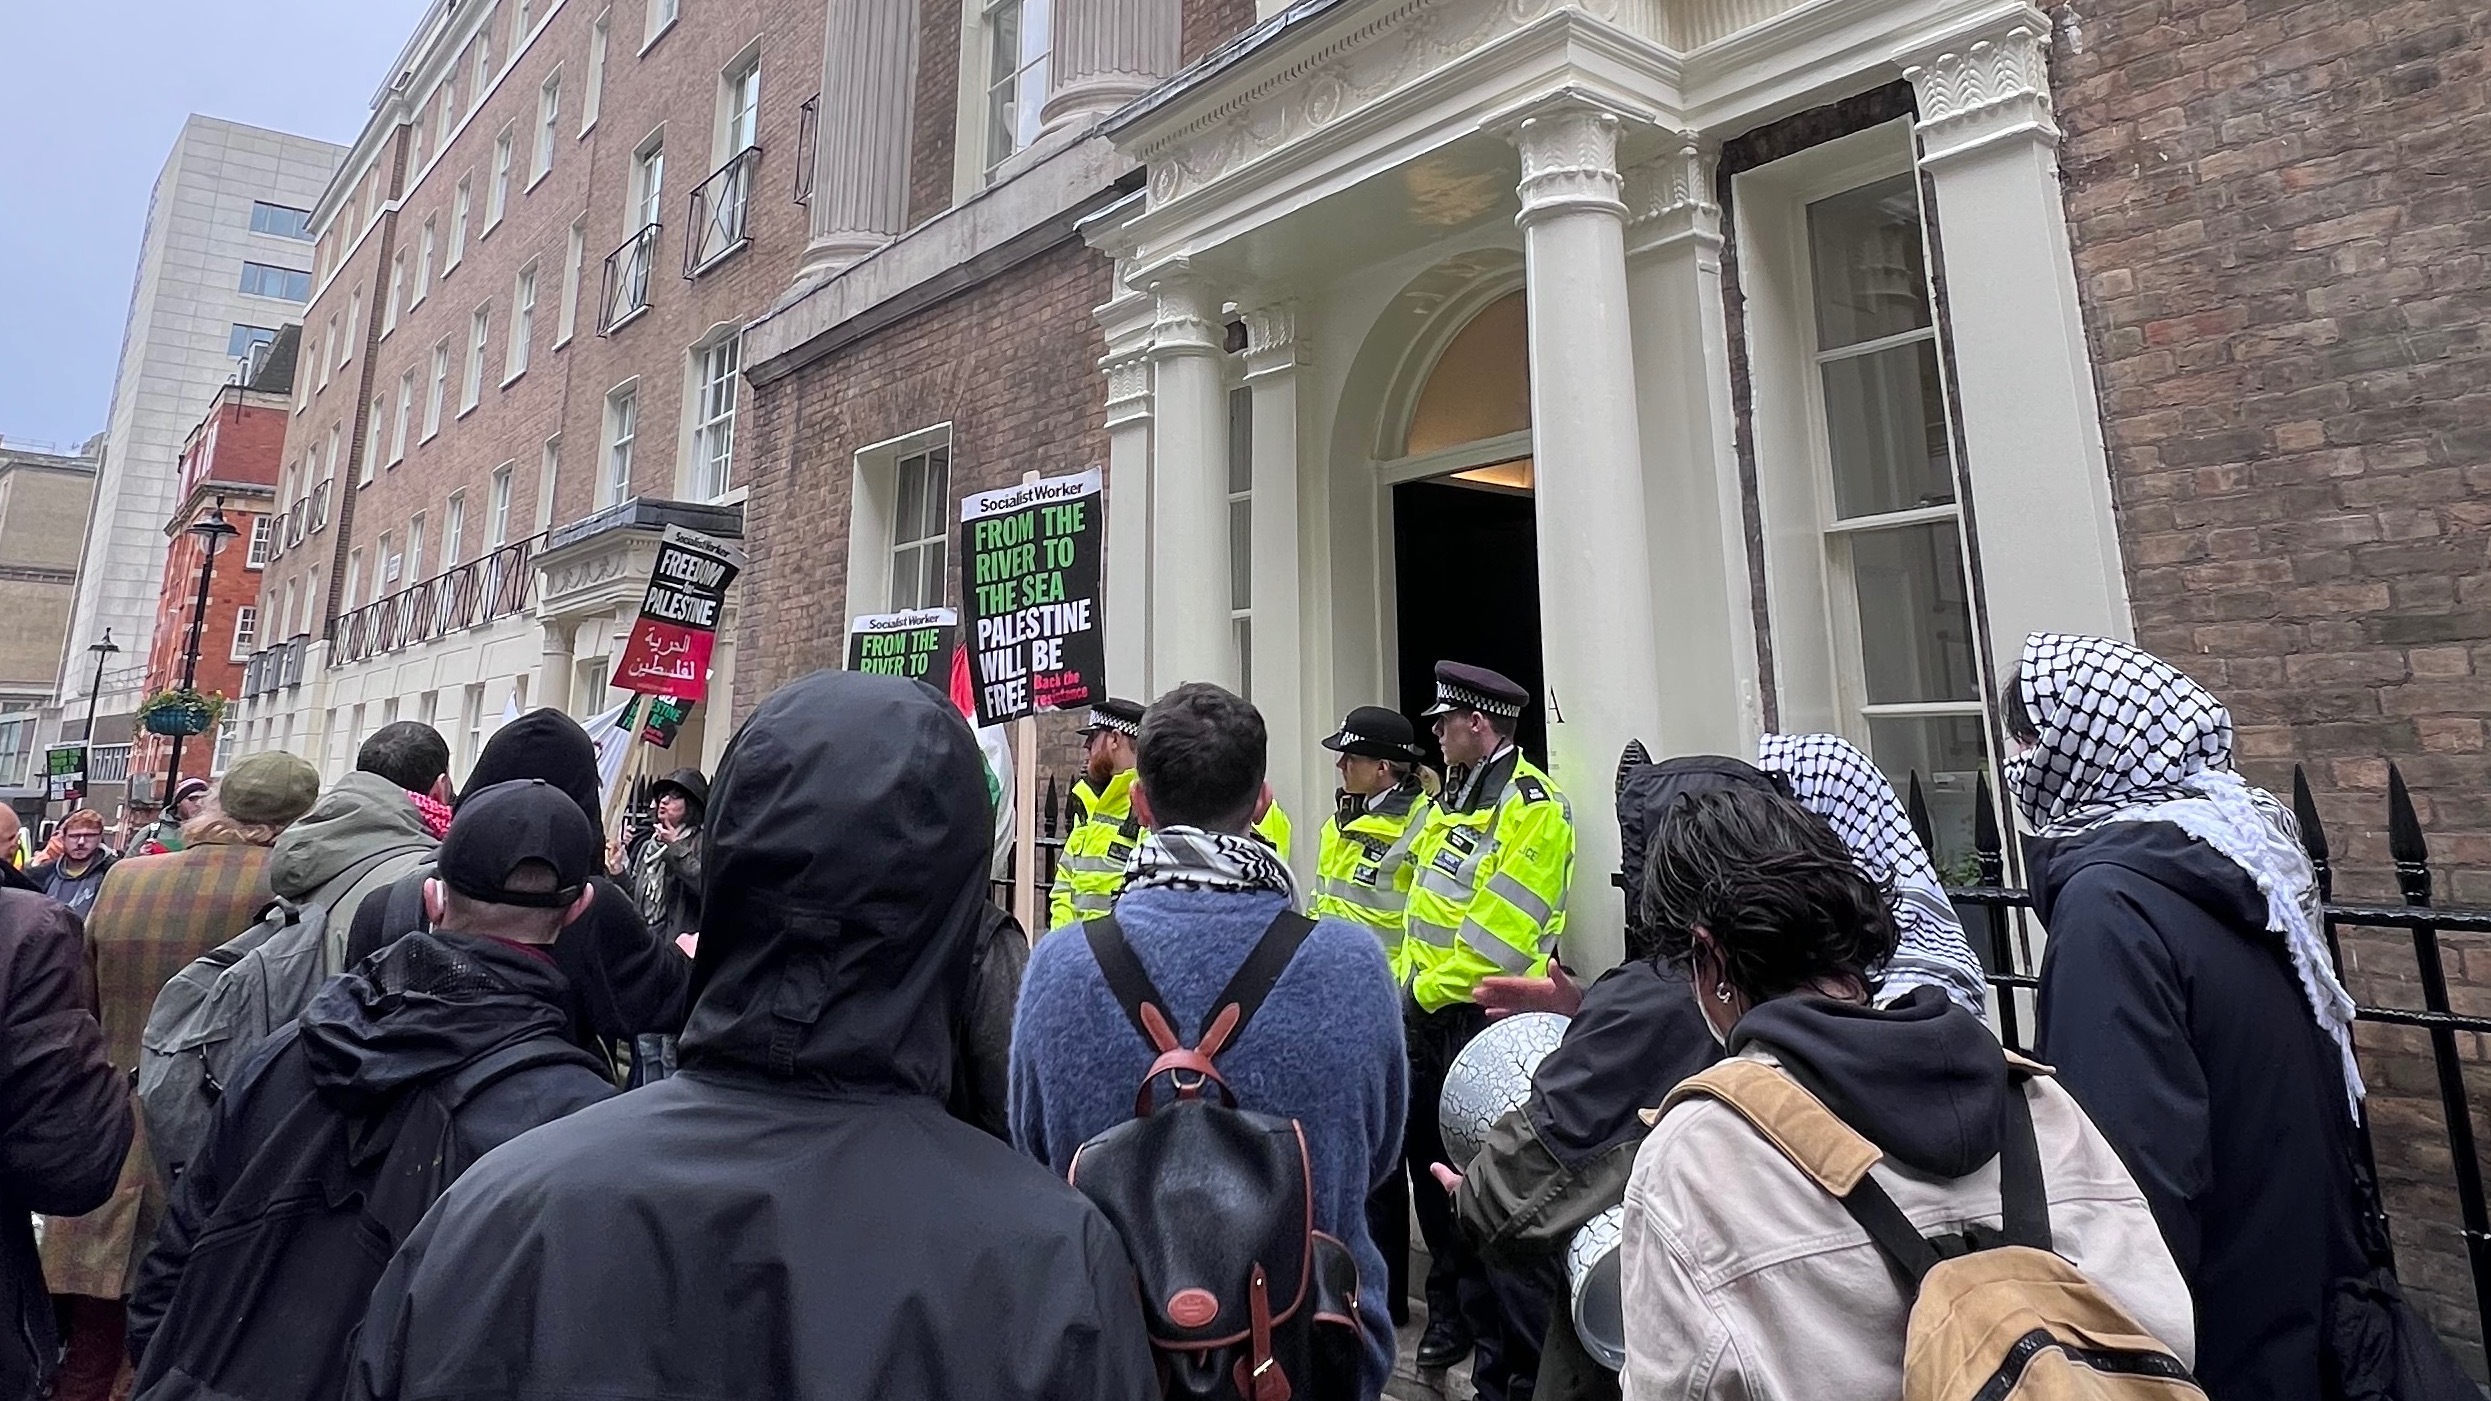 Protestors chanted 'shame on you' at attendees of an event promoting trade to Israel 